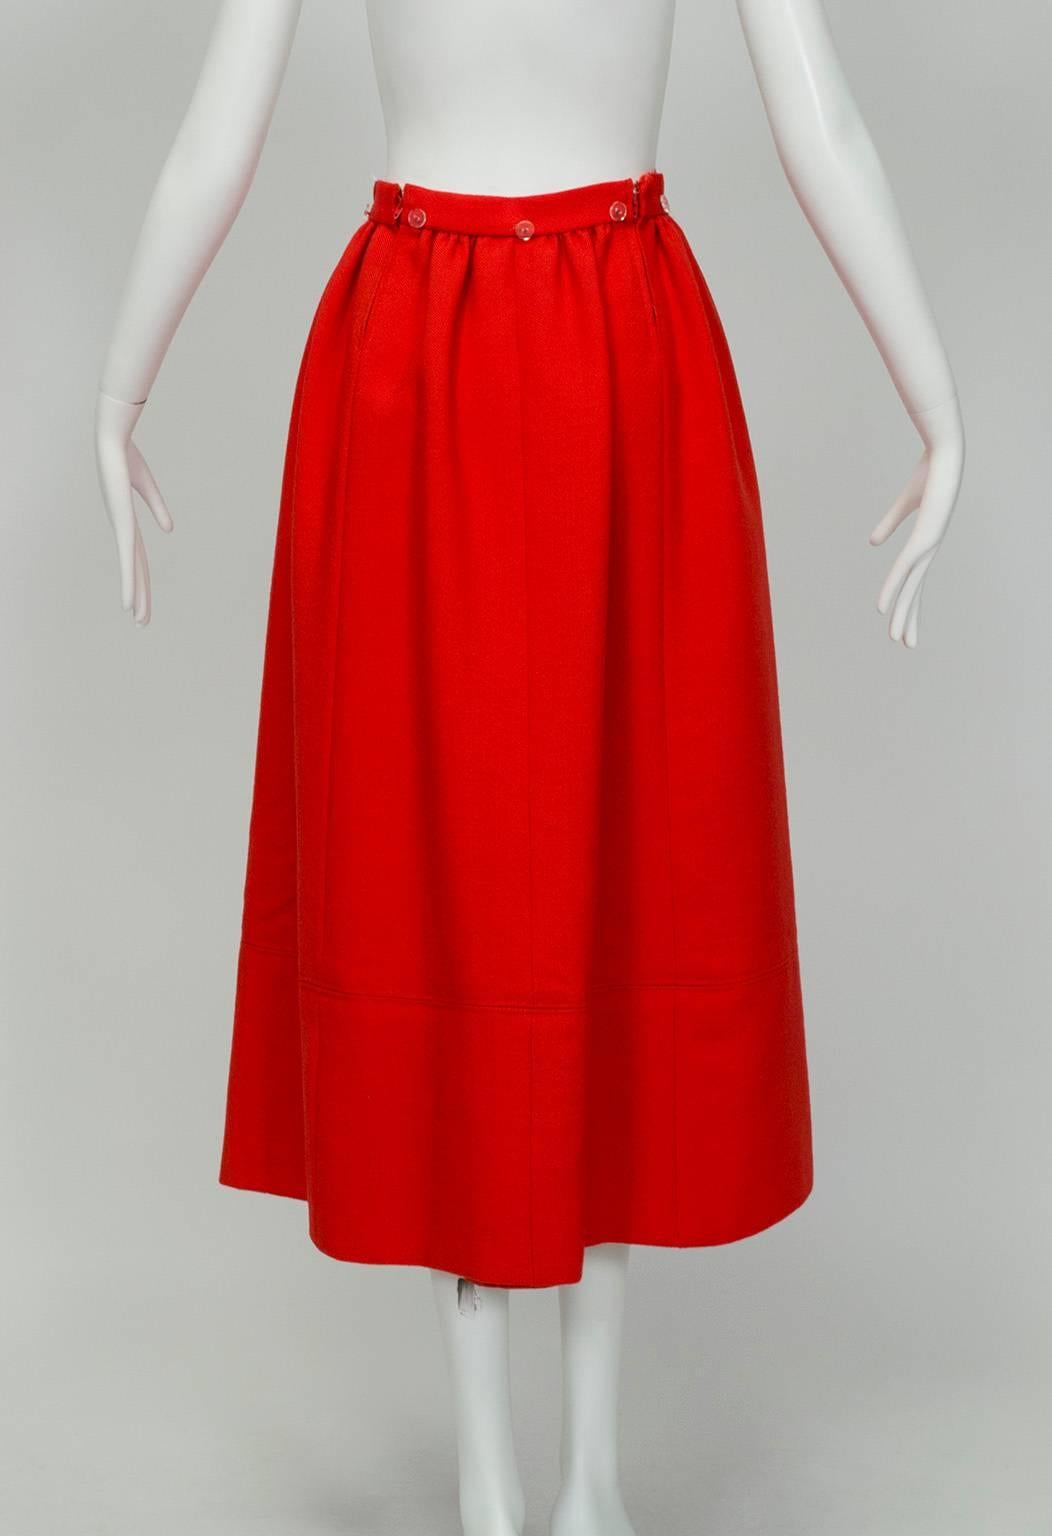 Women's Norman Norell Heavyweight Red Gathered Hostess Skirt - Small, 1960s For Sale